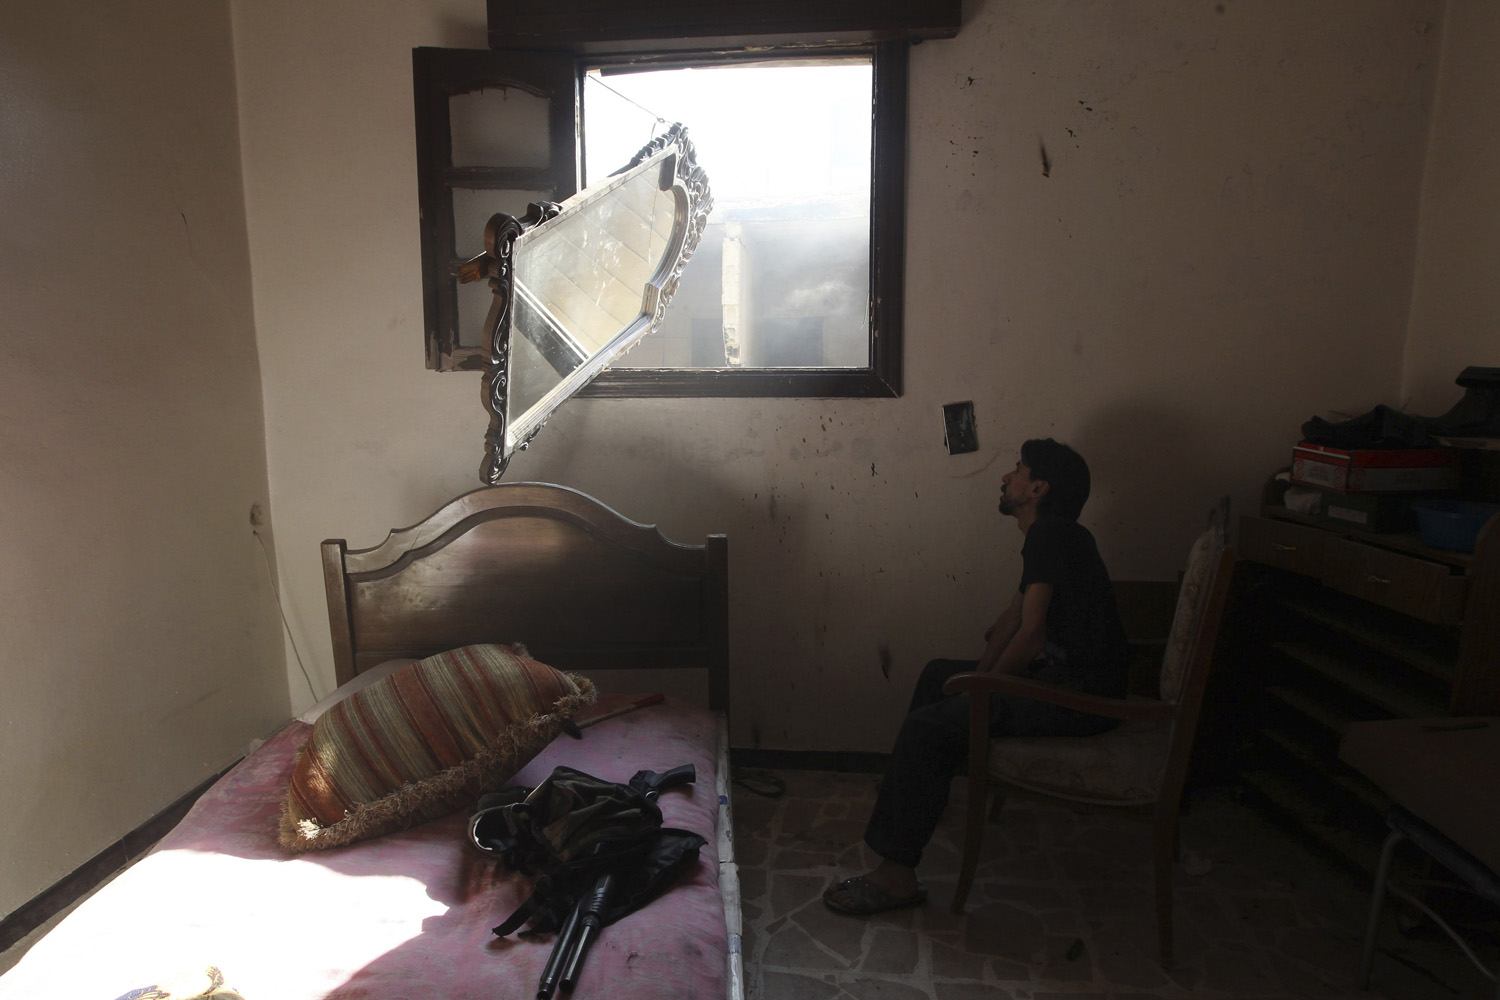 A Free Syrian Army fighter takes up a position as he uses a mirror to look out for snipers loyal to Syria's President Bashar al-Assad in Aleppo's Salaheddine neighborhood,